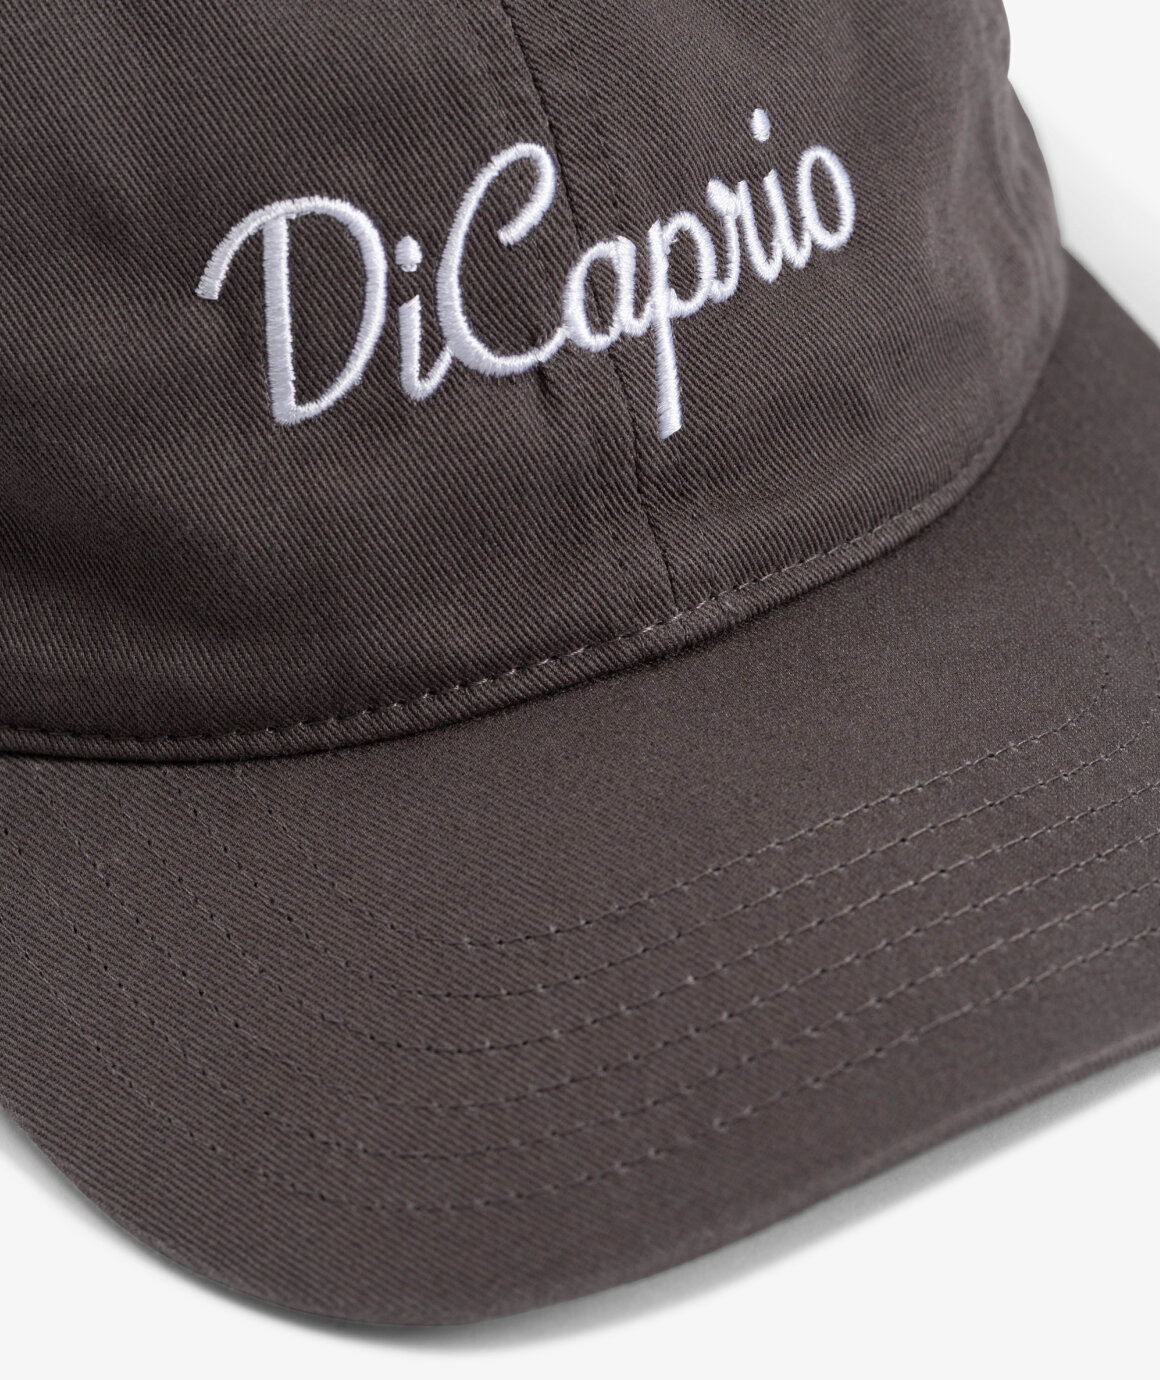 Norse Store | Shipping Worldwide - IDEA Dicaprio Cap - Charcoal